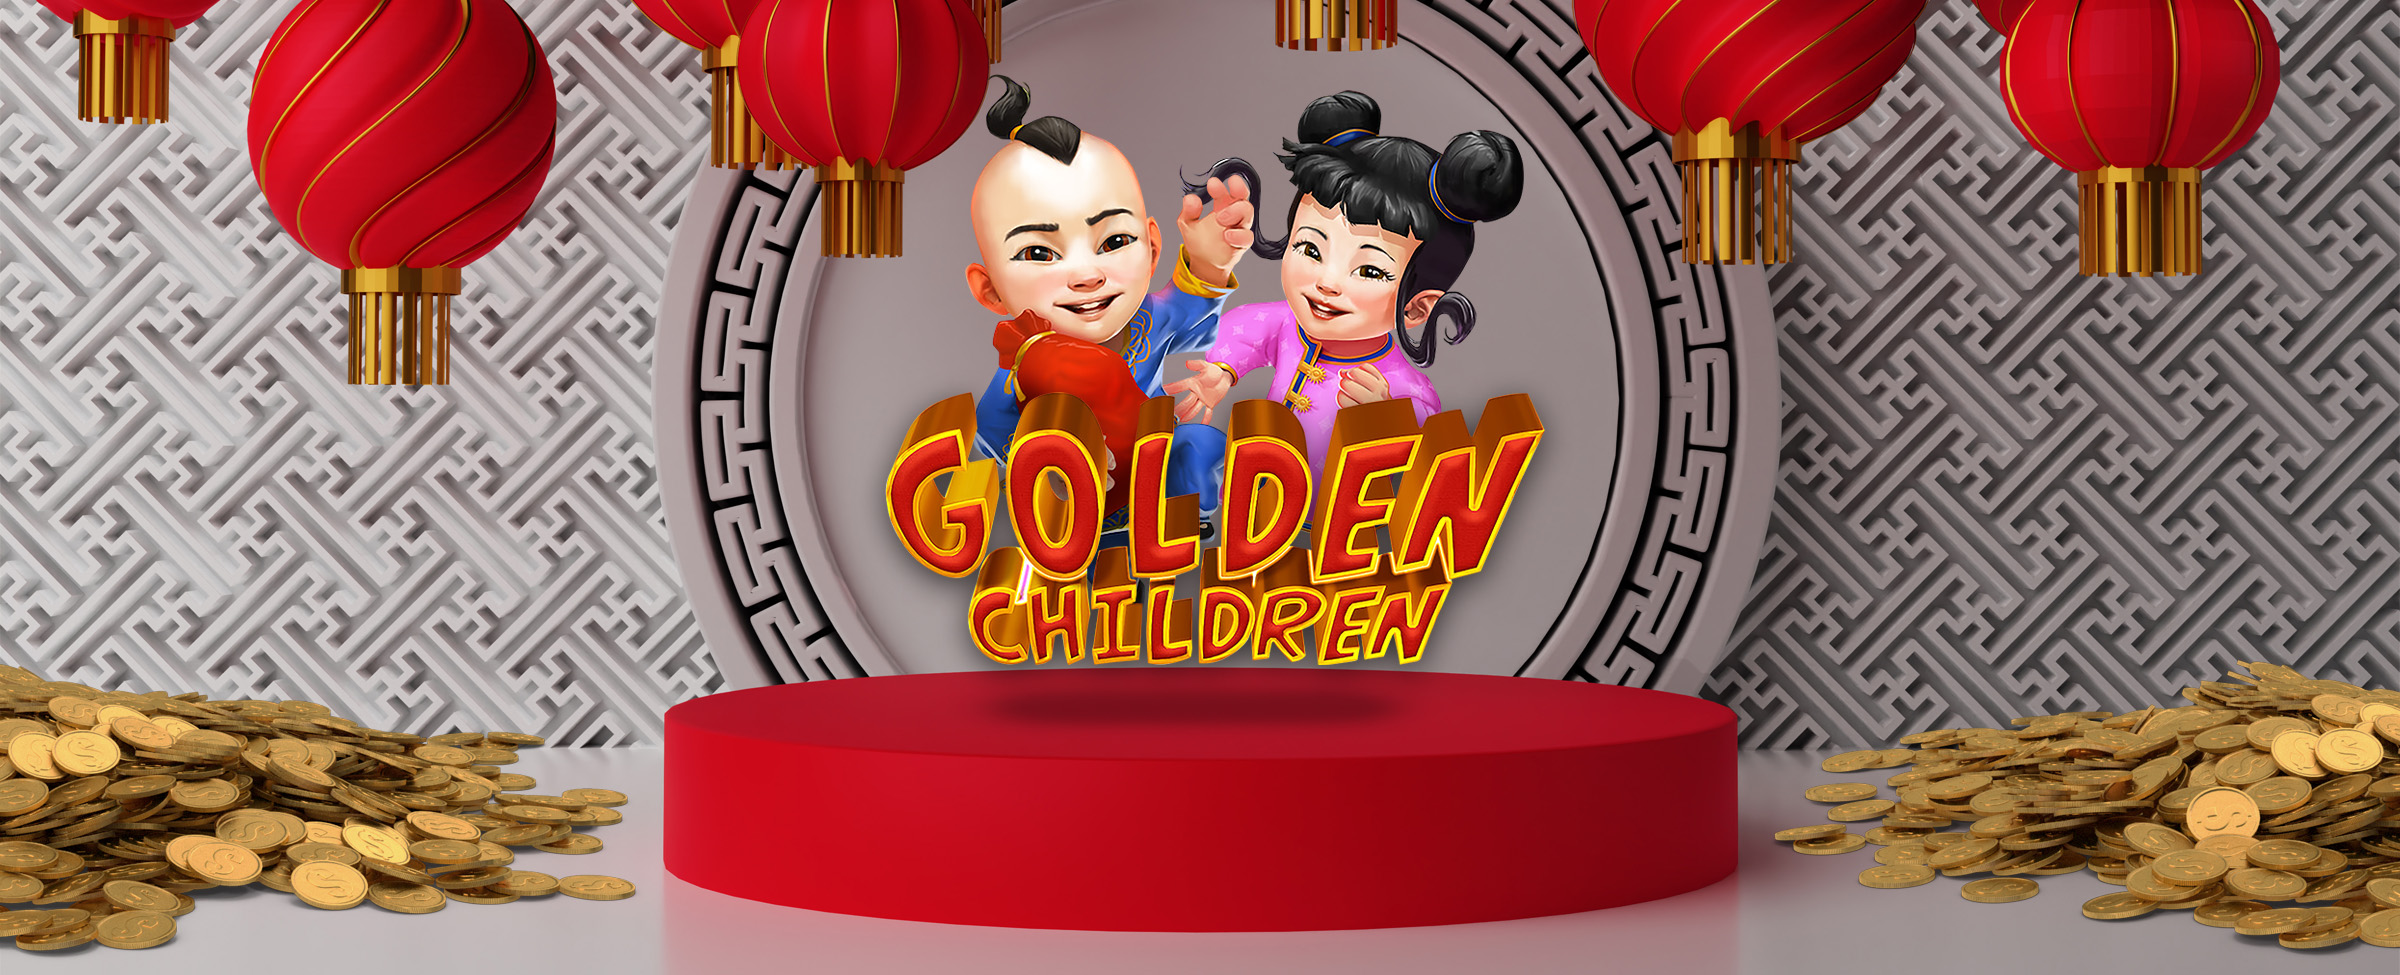 The logo from Cafe Casino’s slot game called Golden Children is seen hovering over a small, red circular stage riser, flanked by large piles of gold coins on the floor. While overhead, red lanterns hang in front of a wall decorated in traditional Chinese patterns.